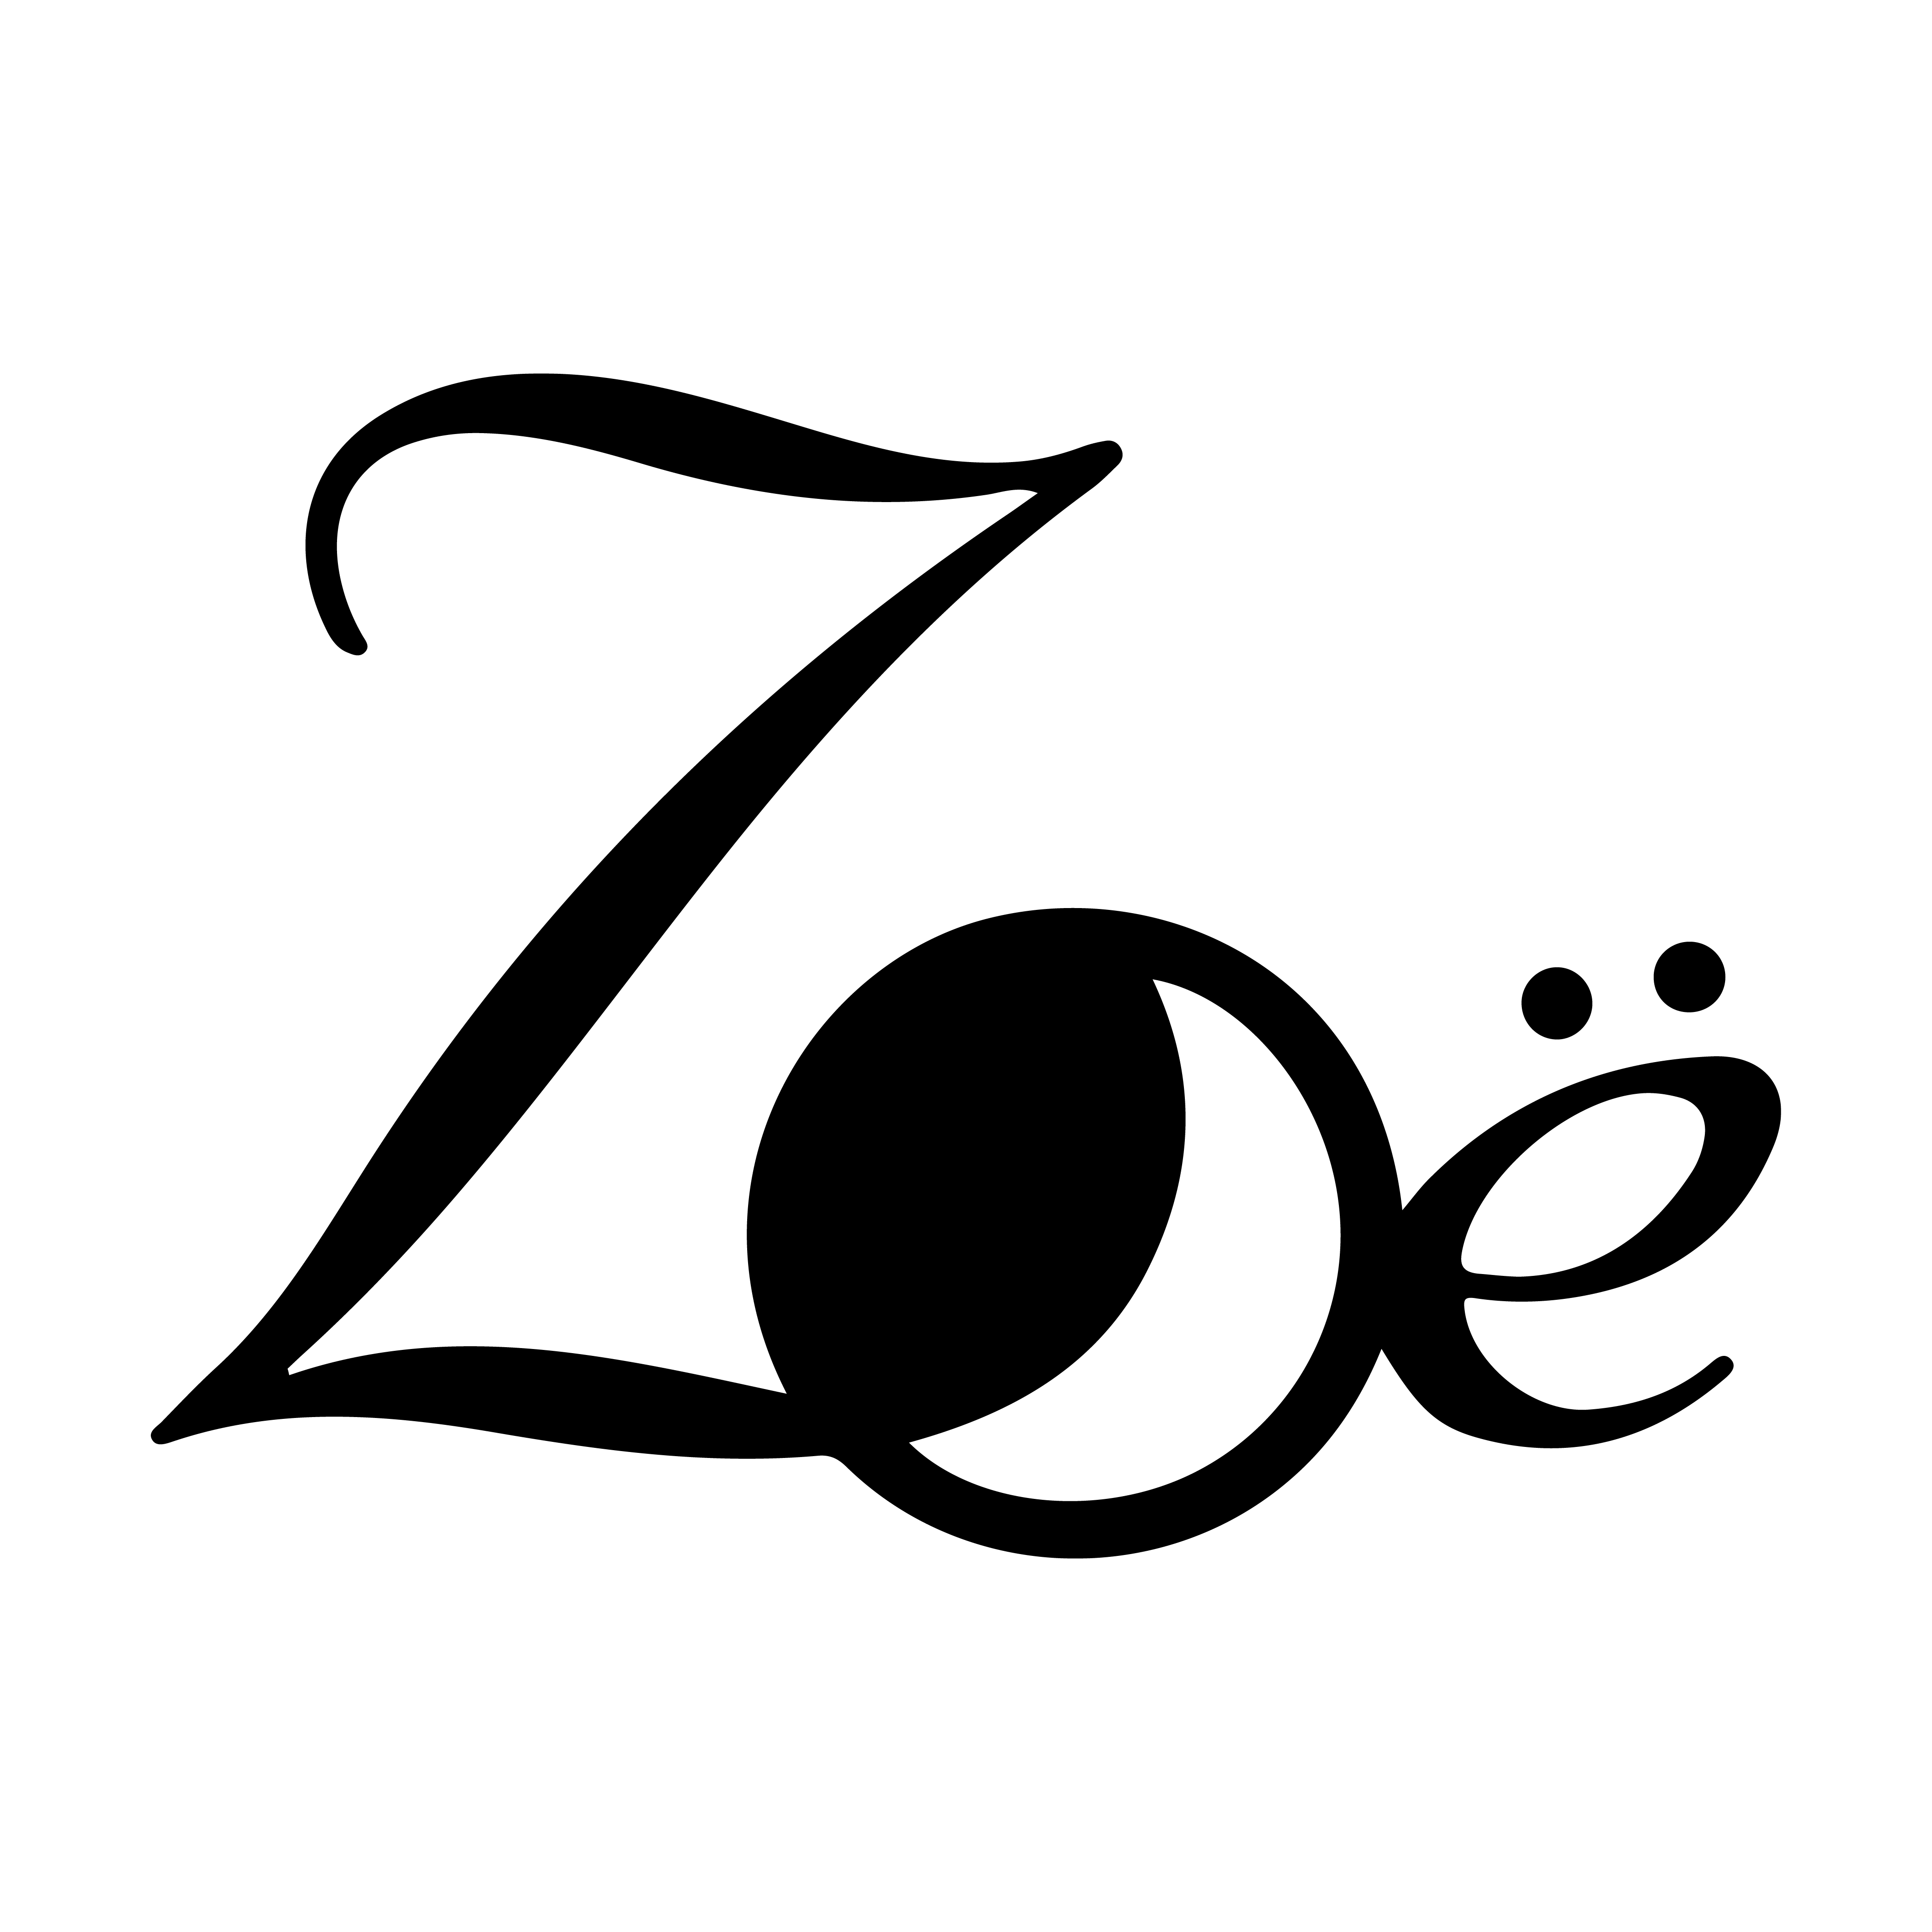 Zoe's logo, handdrawn elements, the O has a moon in it and the e has an umlaut